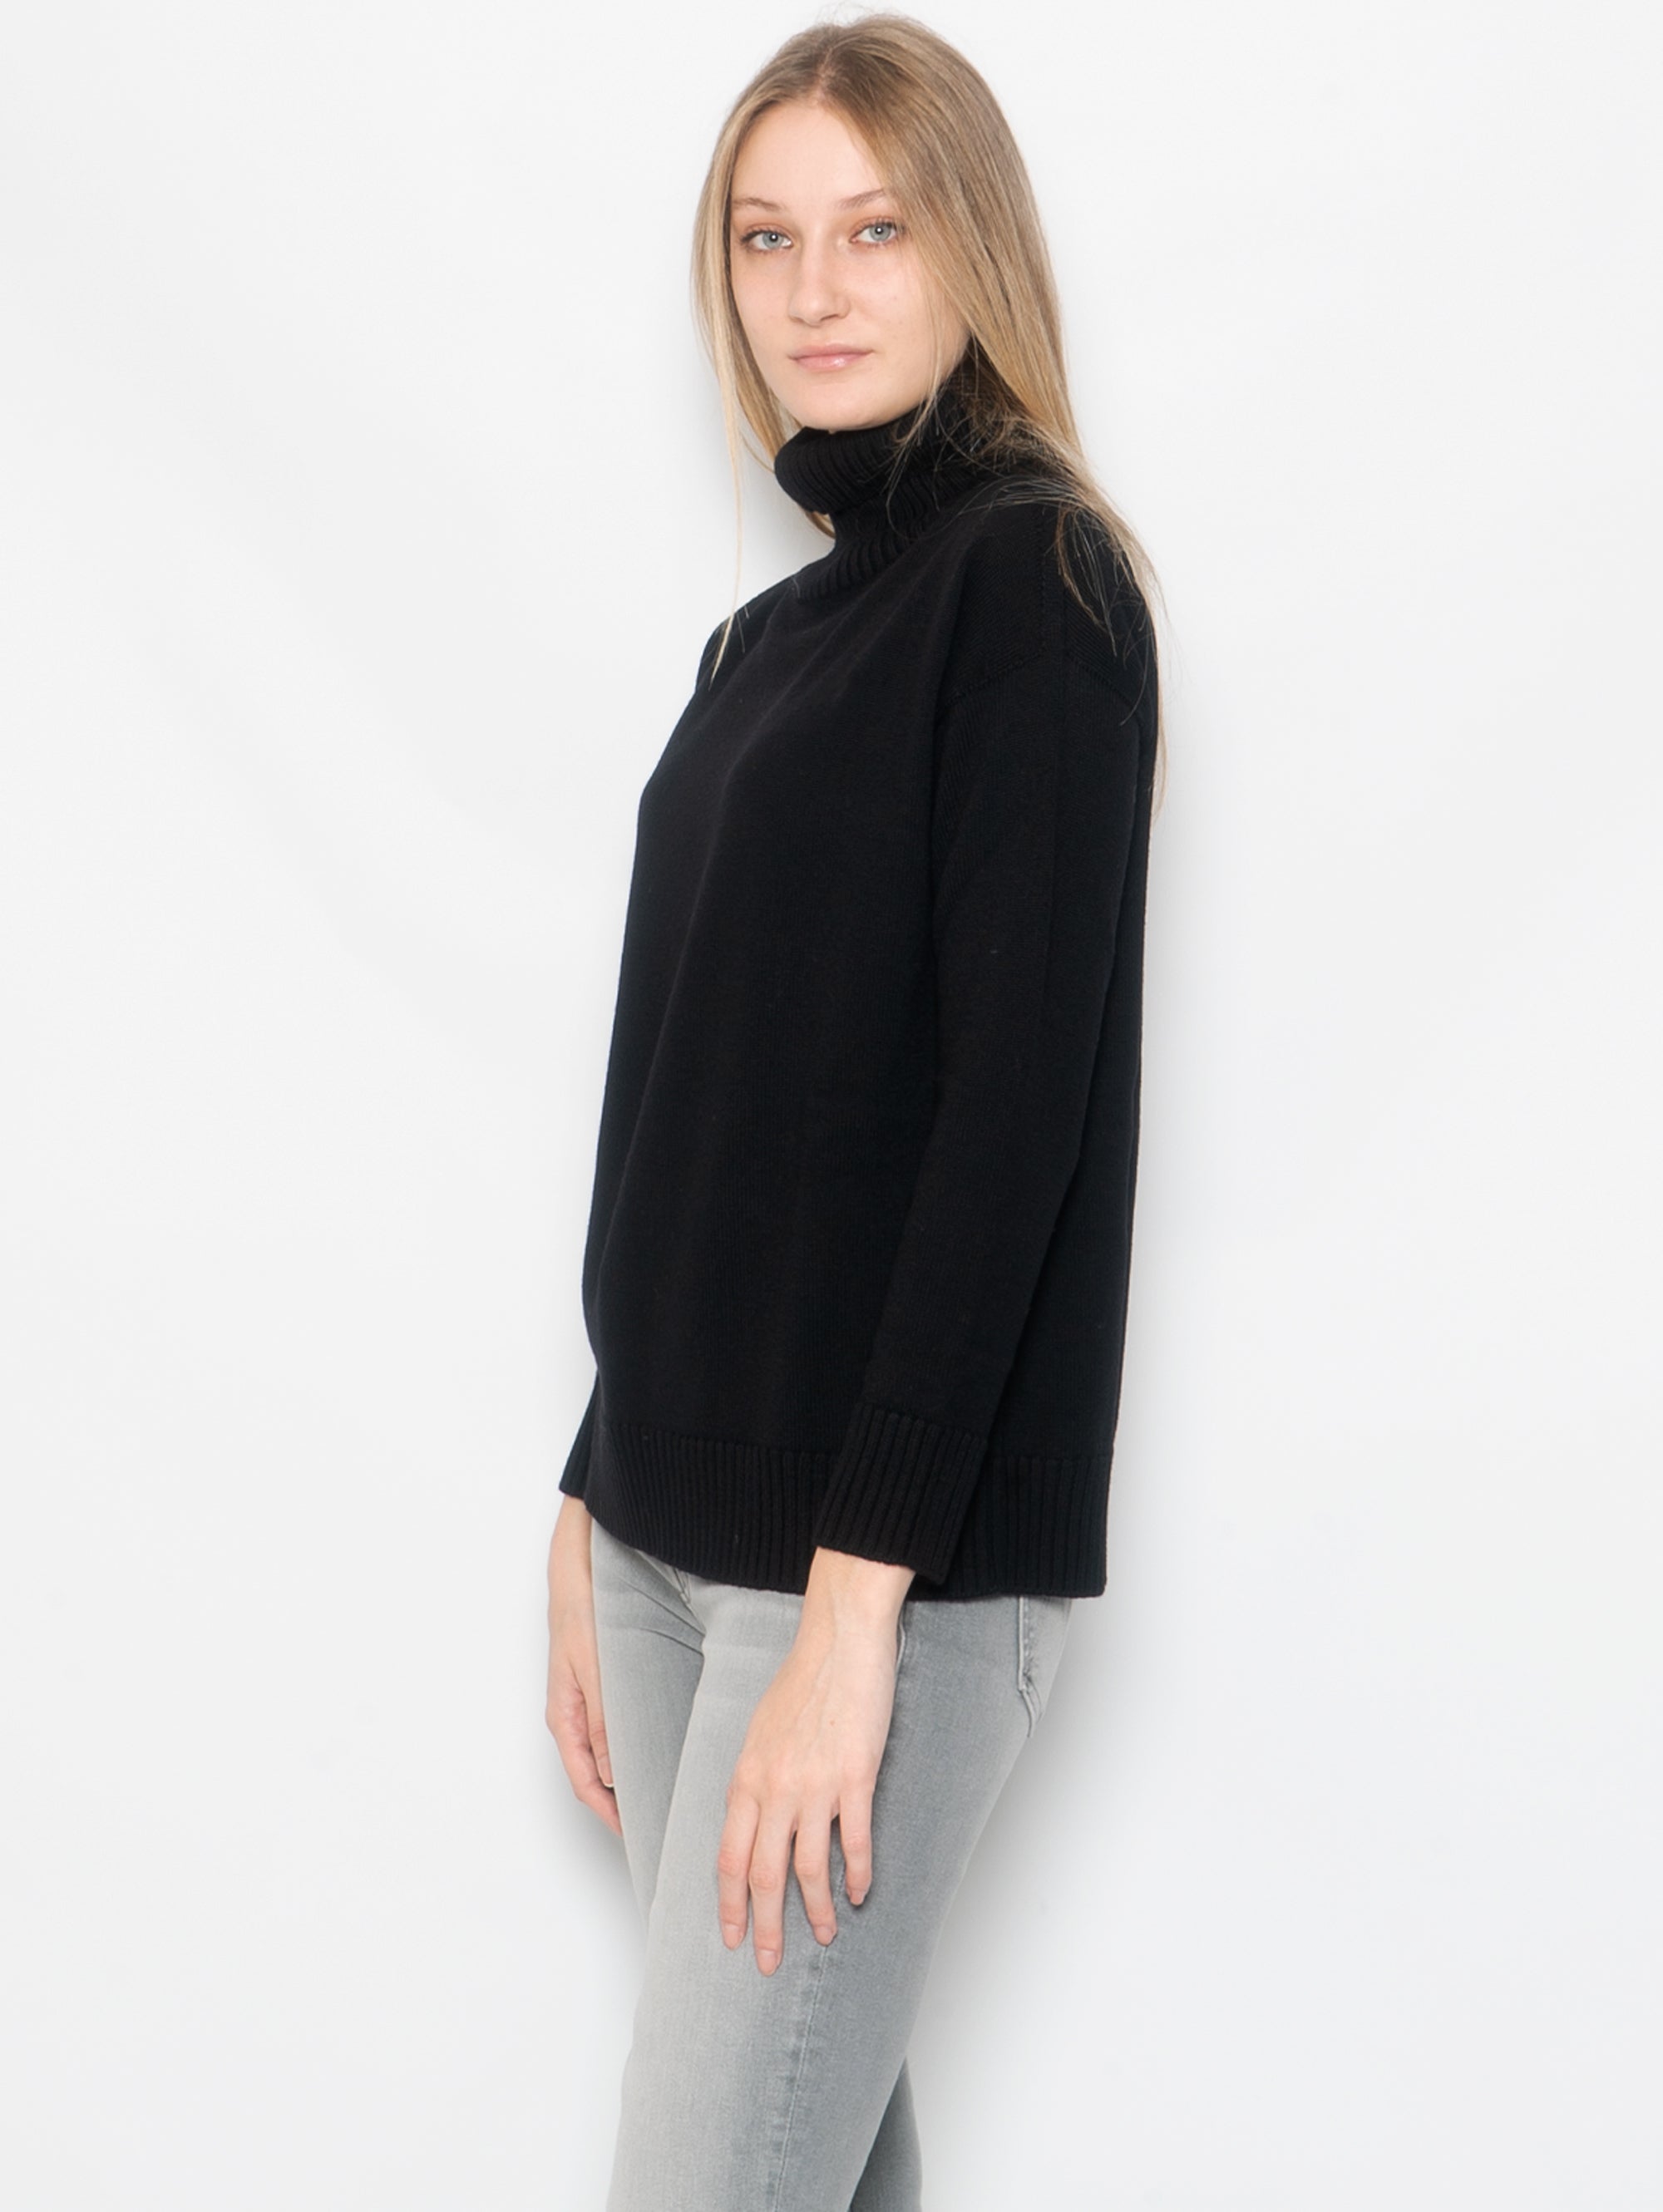 Black shaved wool sweater